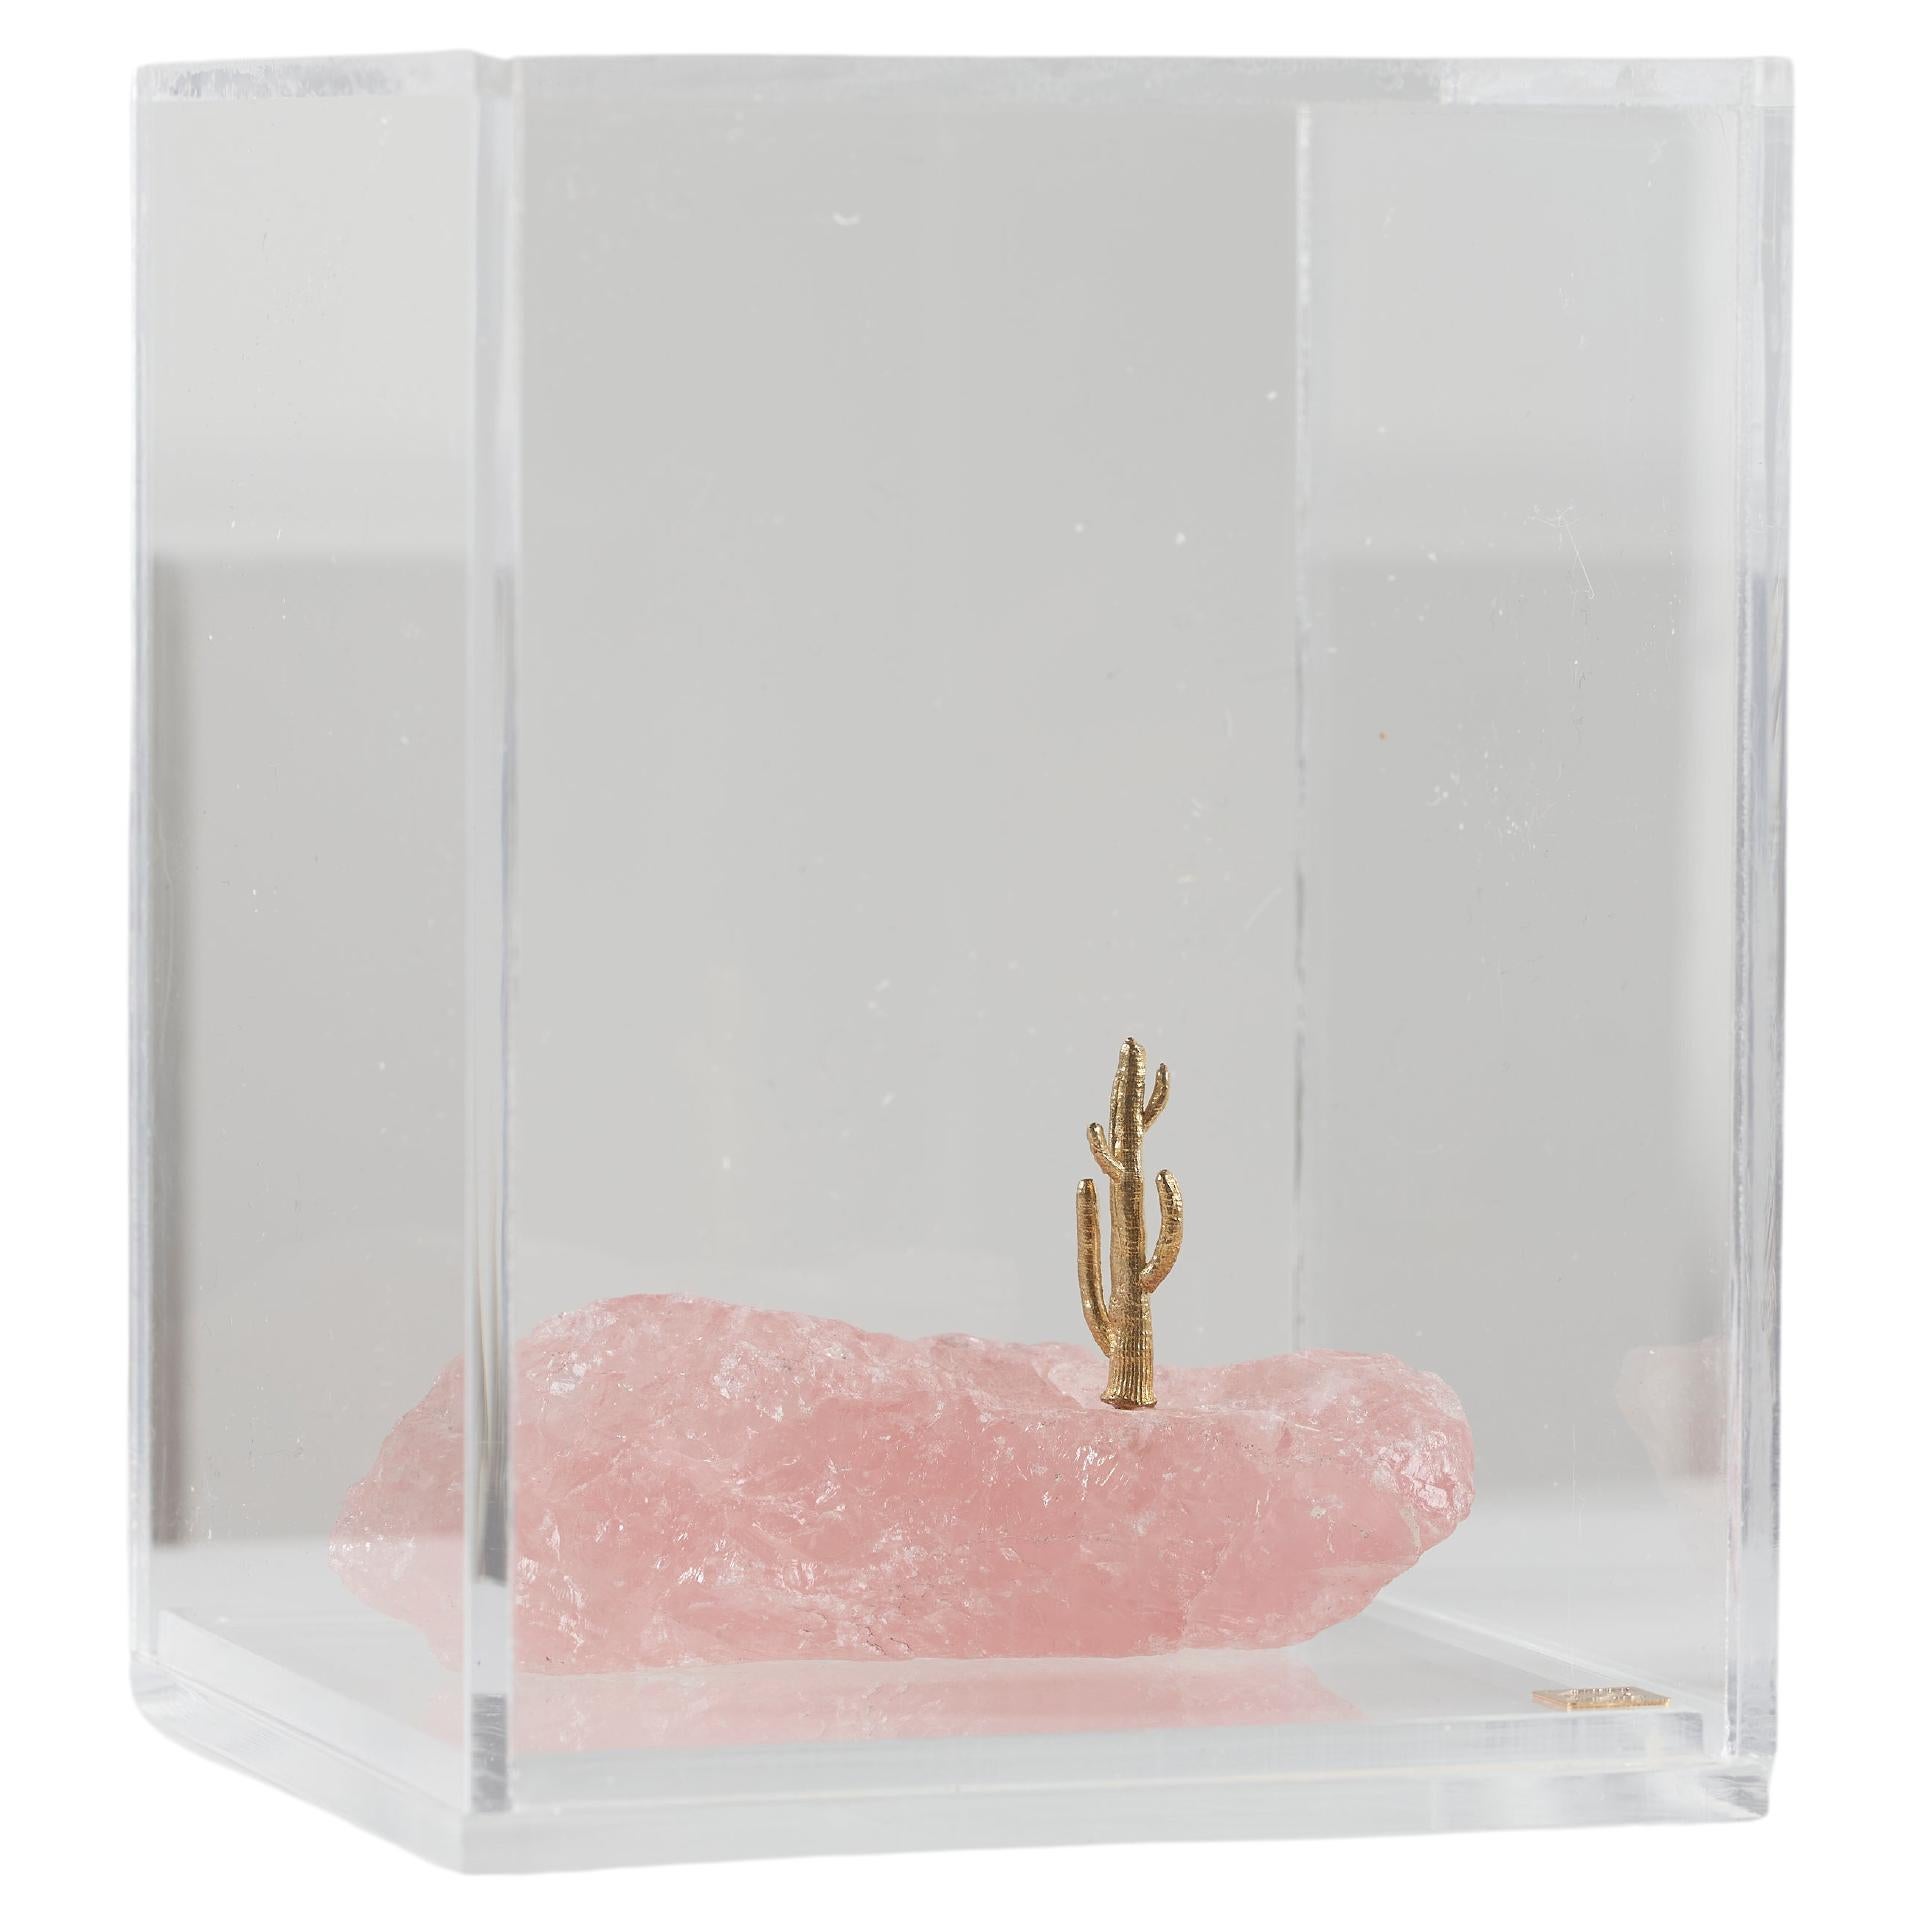 Mandacaru Series, Stone and Brass Cactus Sculpture in Acrylic Box For Sale